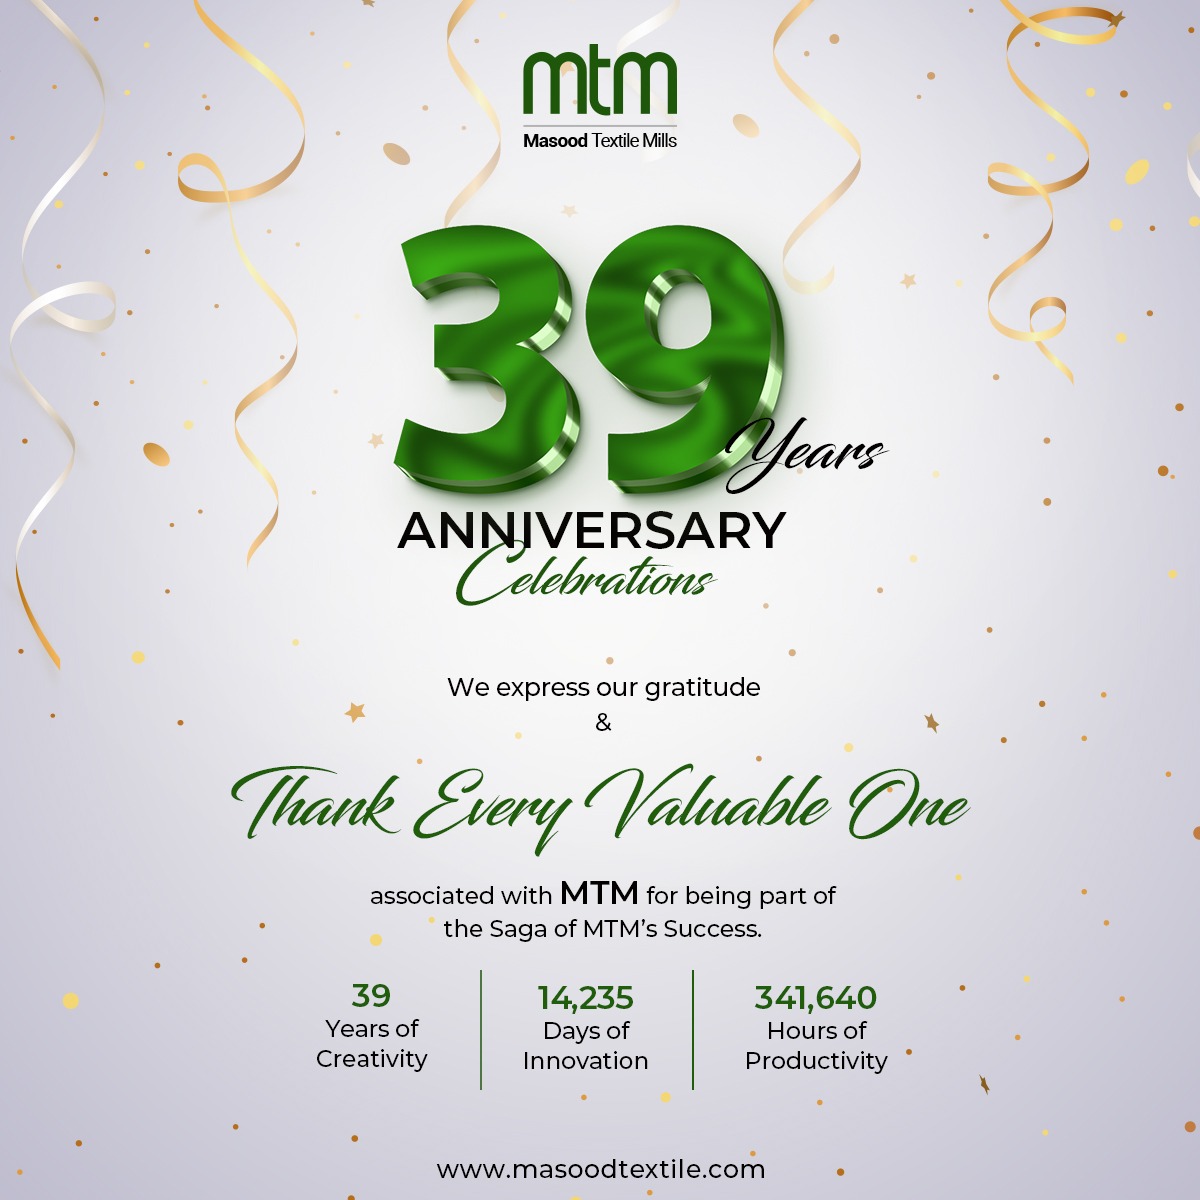 As MTM celebrates its 39th year, we take a moment to reflect on the passage of time and the incredible journey we have embarked upon. 

Thanks to everyone who stood fast with us in this journey.
 #corporatehr #corporatecommunications #thankyou